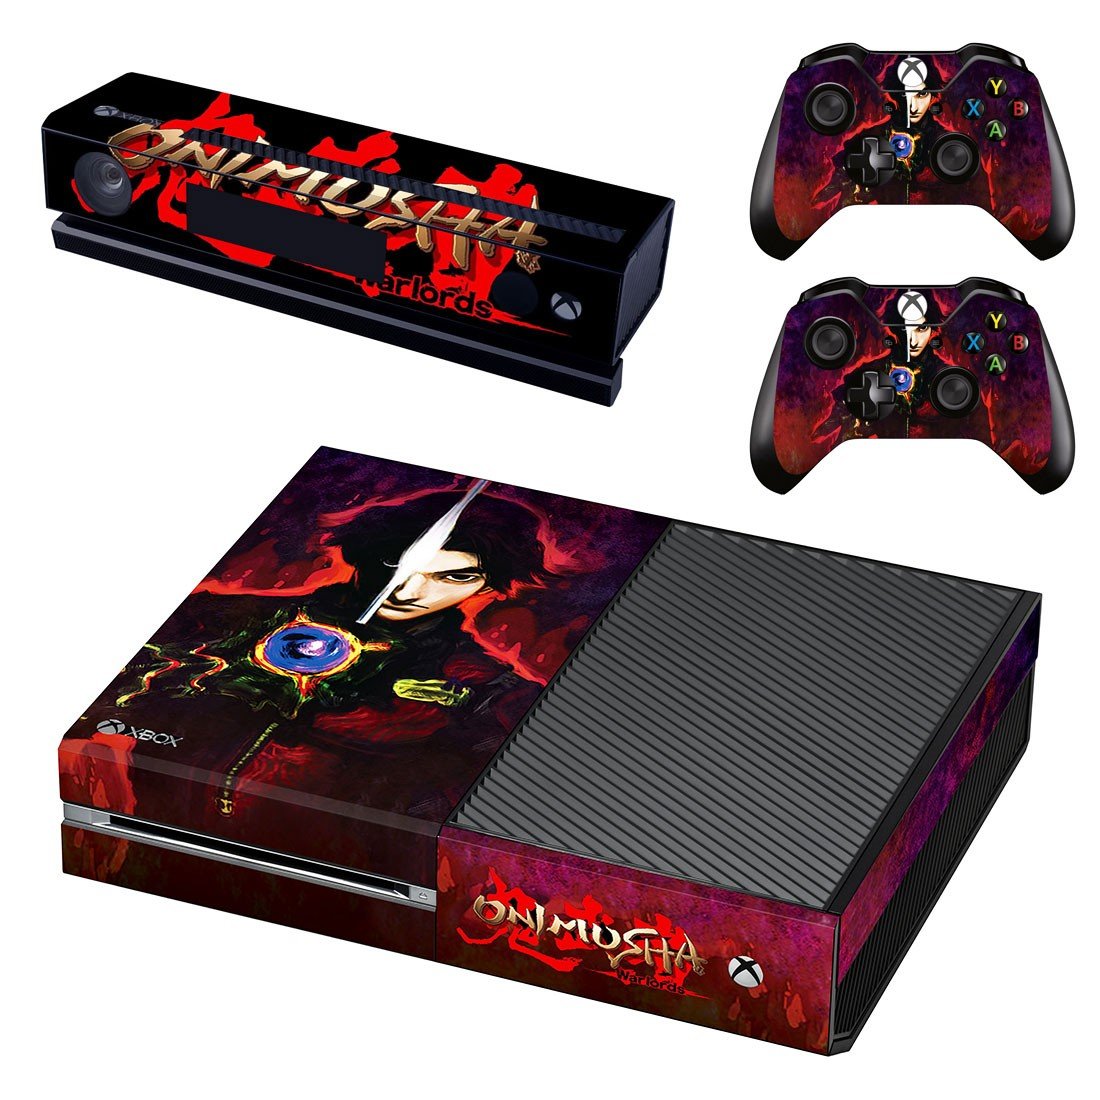 Xbox One And Controllers Skin Cover Onimusha